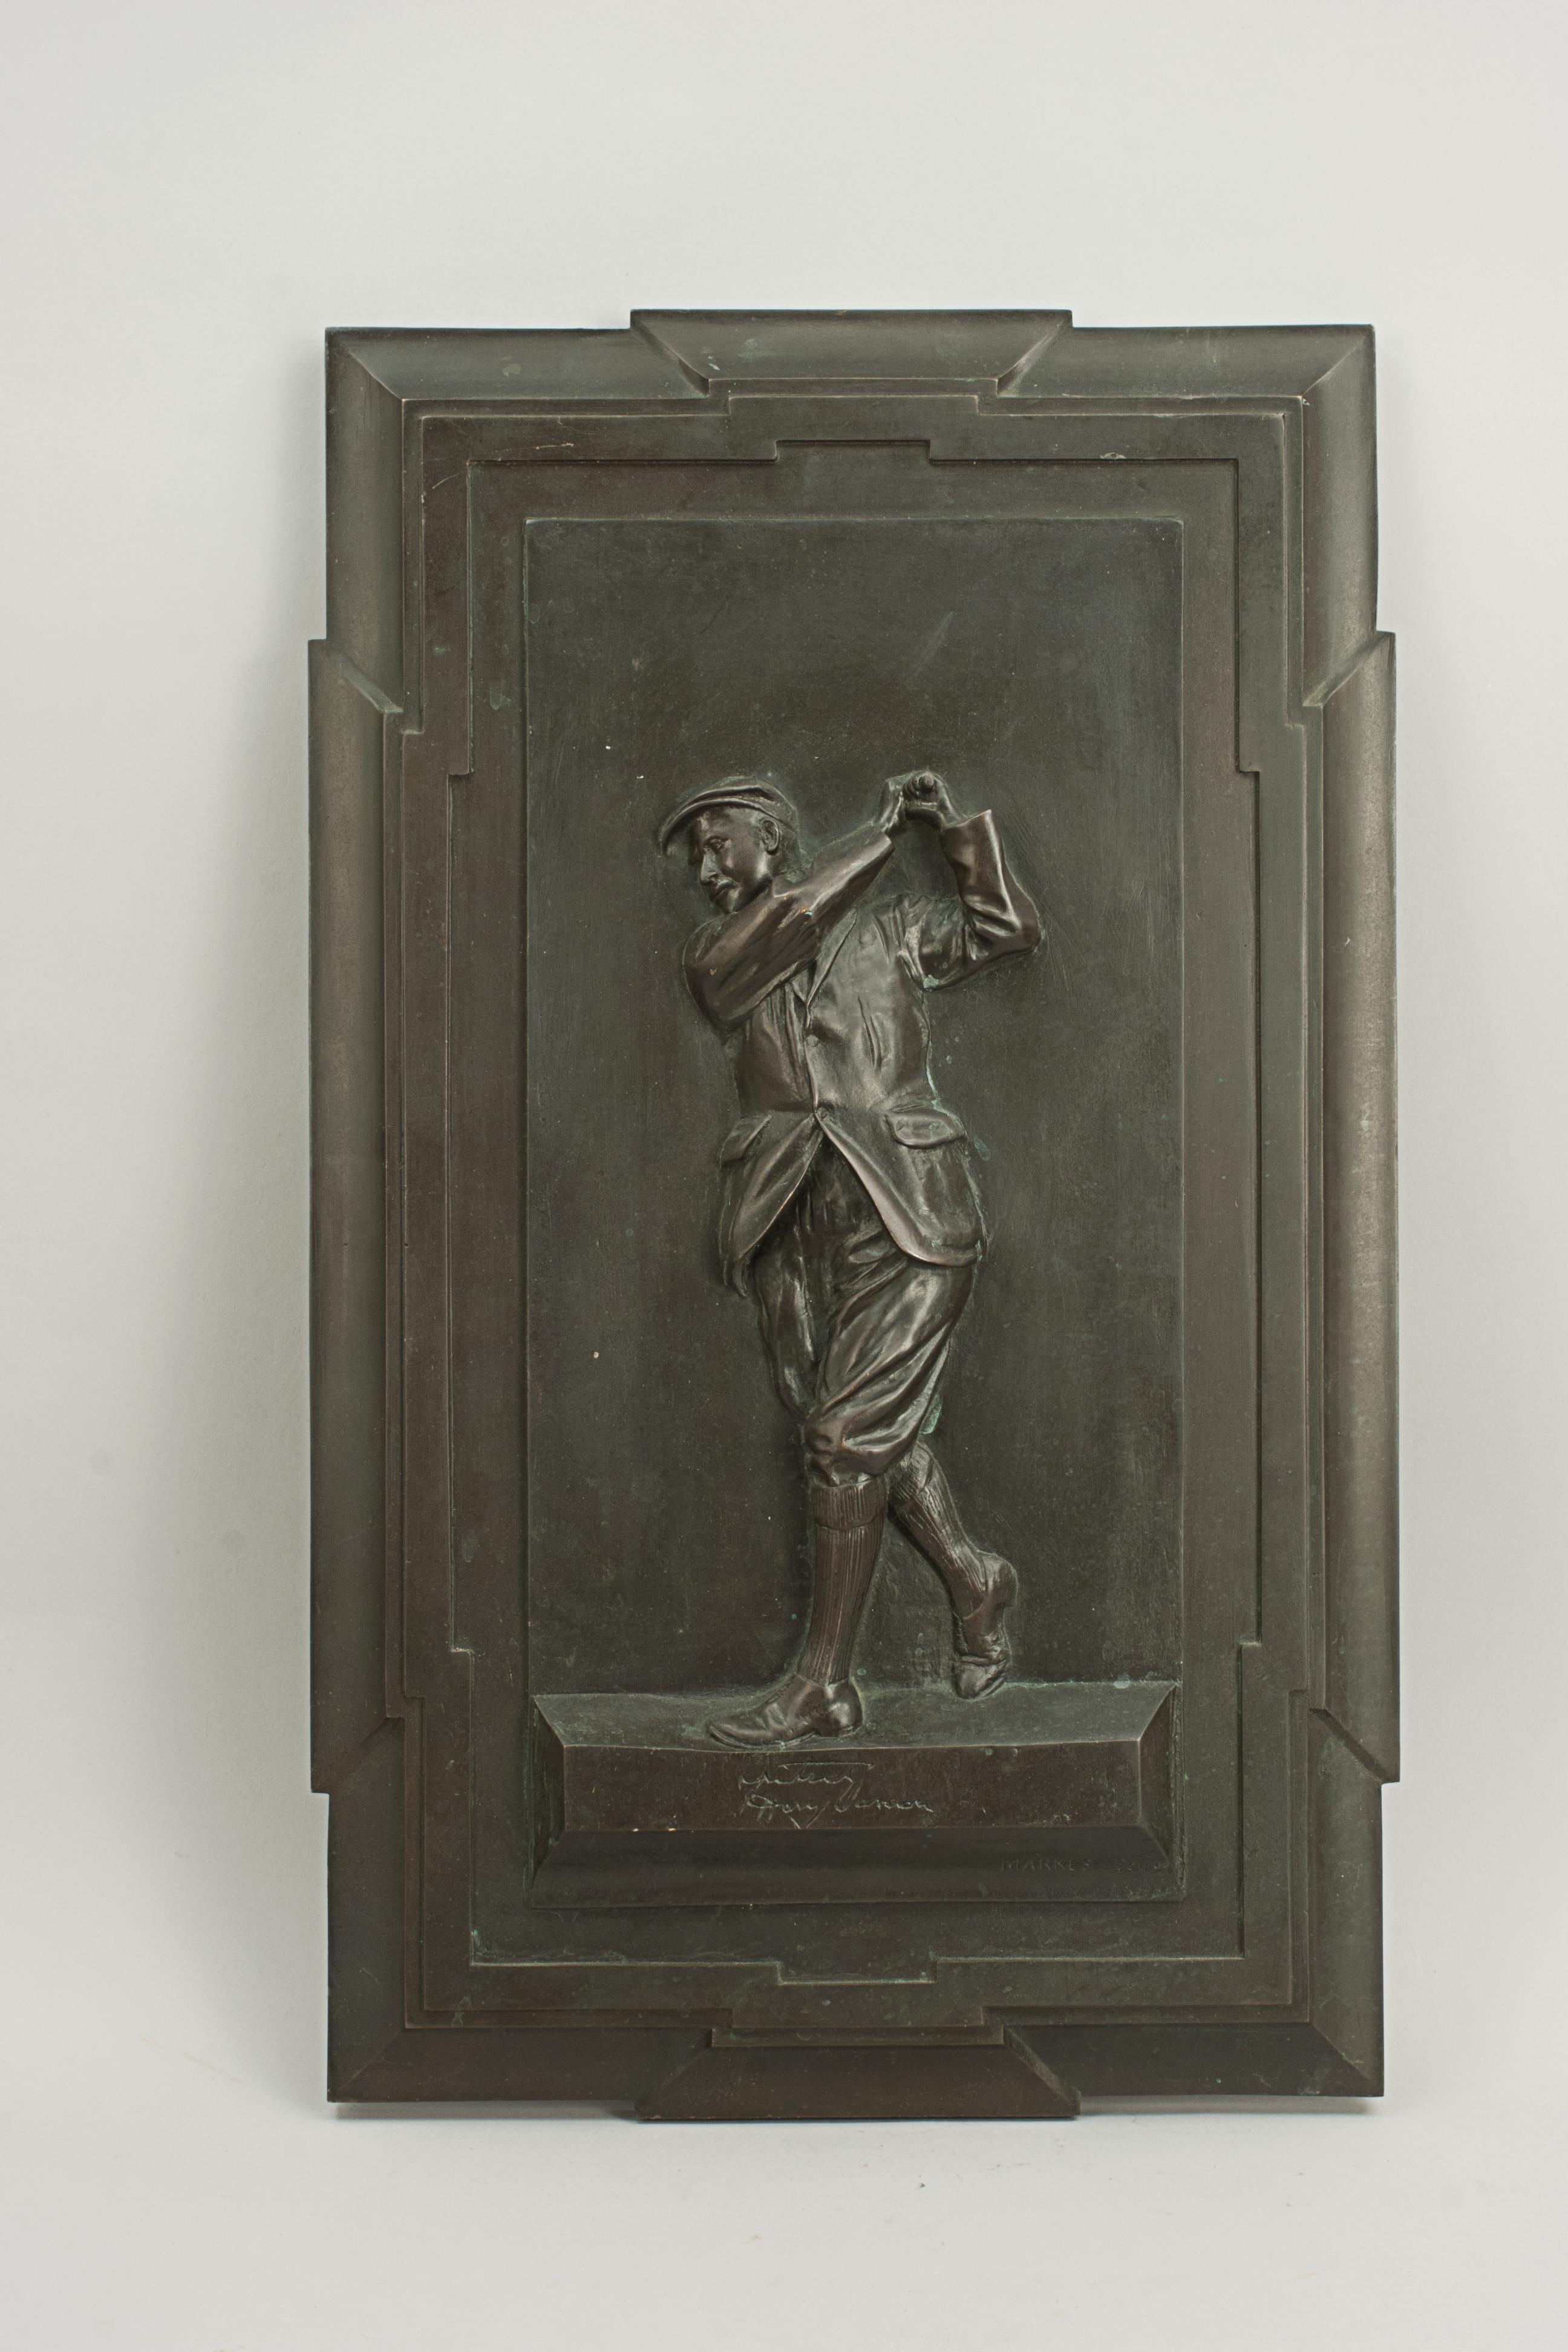 Antique bronze plaque of Harry Vardon.
A rare, MARKES, cast bronze plaque of the Champion Golfer Harry Vardon. The impressive and well known figure of Vardon is modelled in relief and mounted onto a cast moulded bronze frame and shows Vardon in the